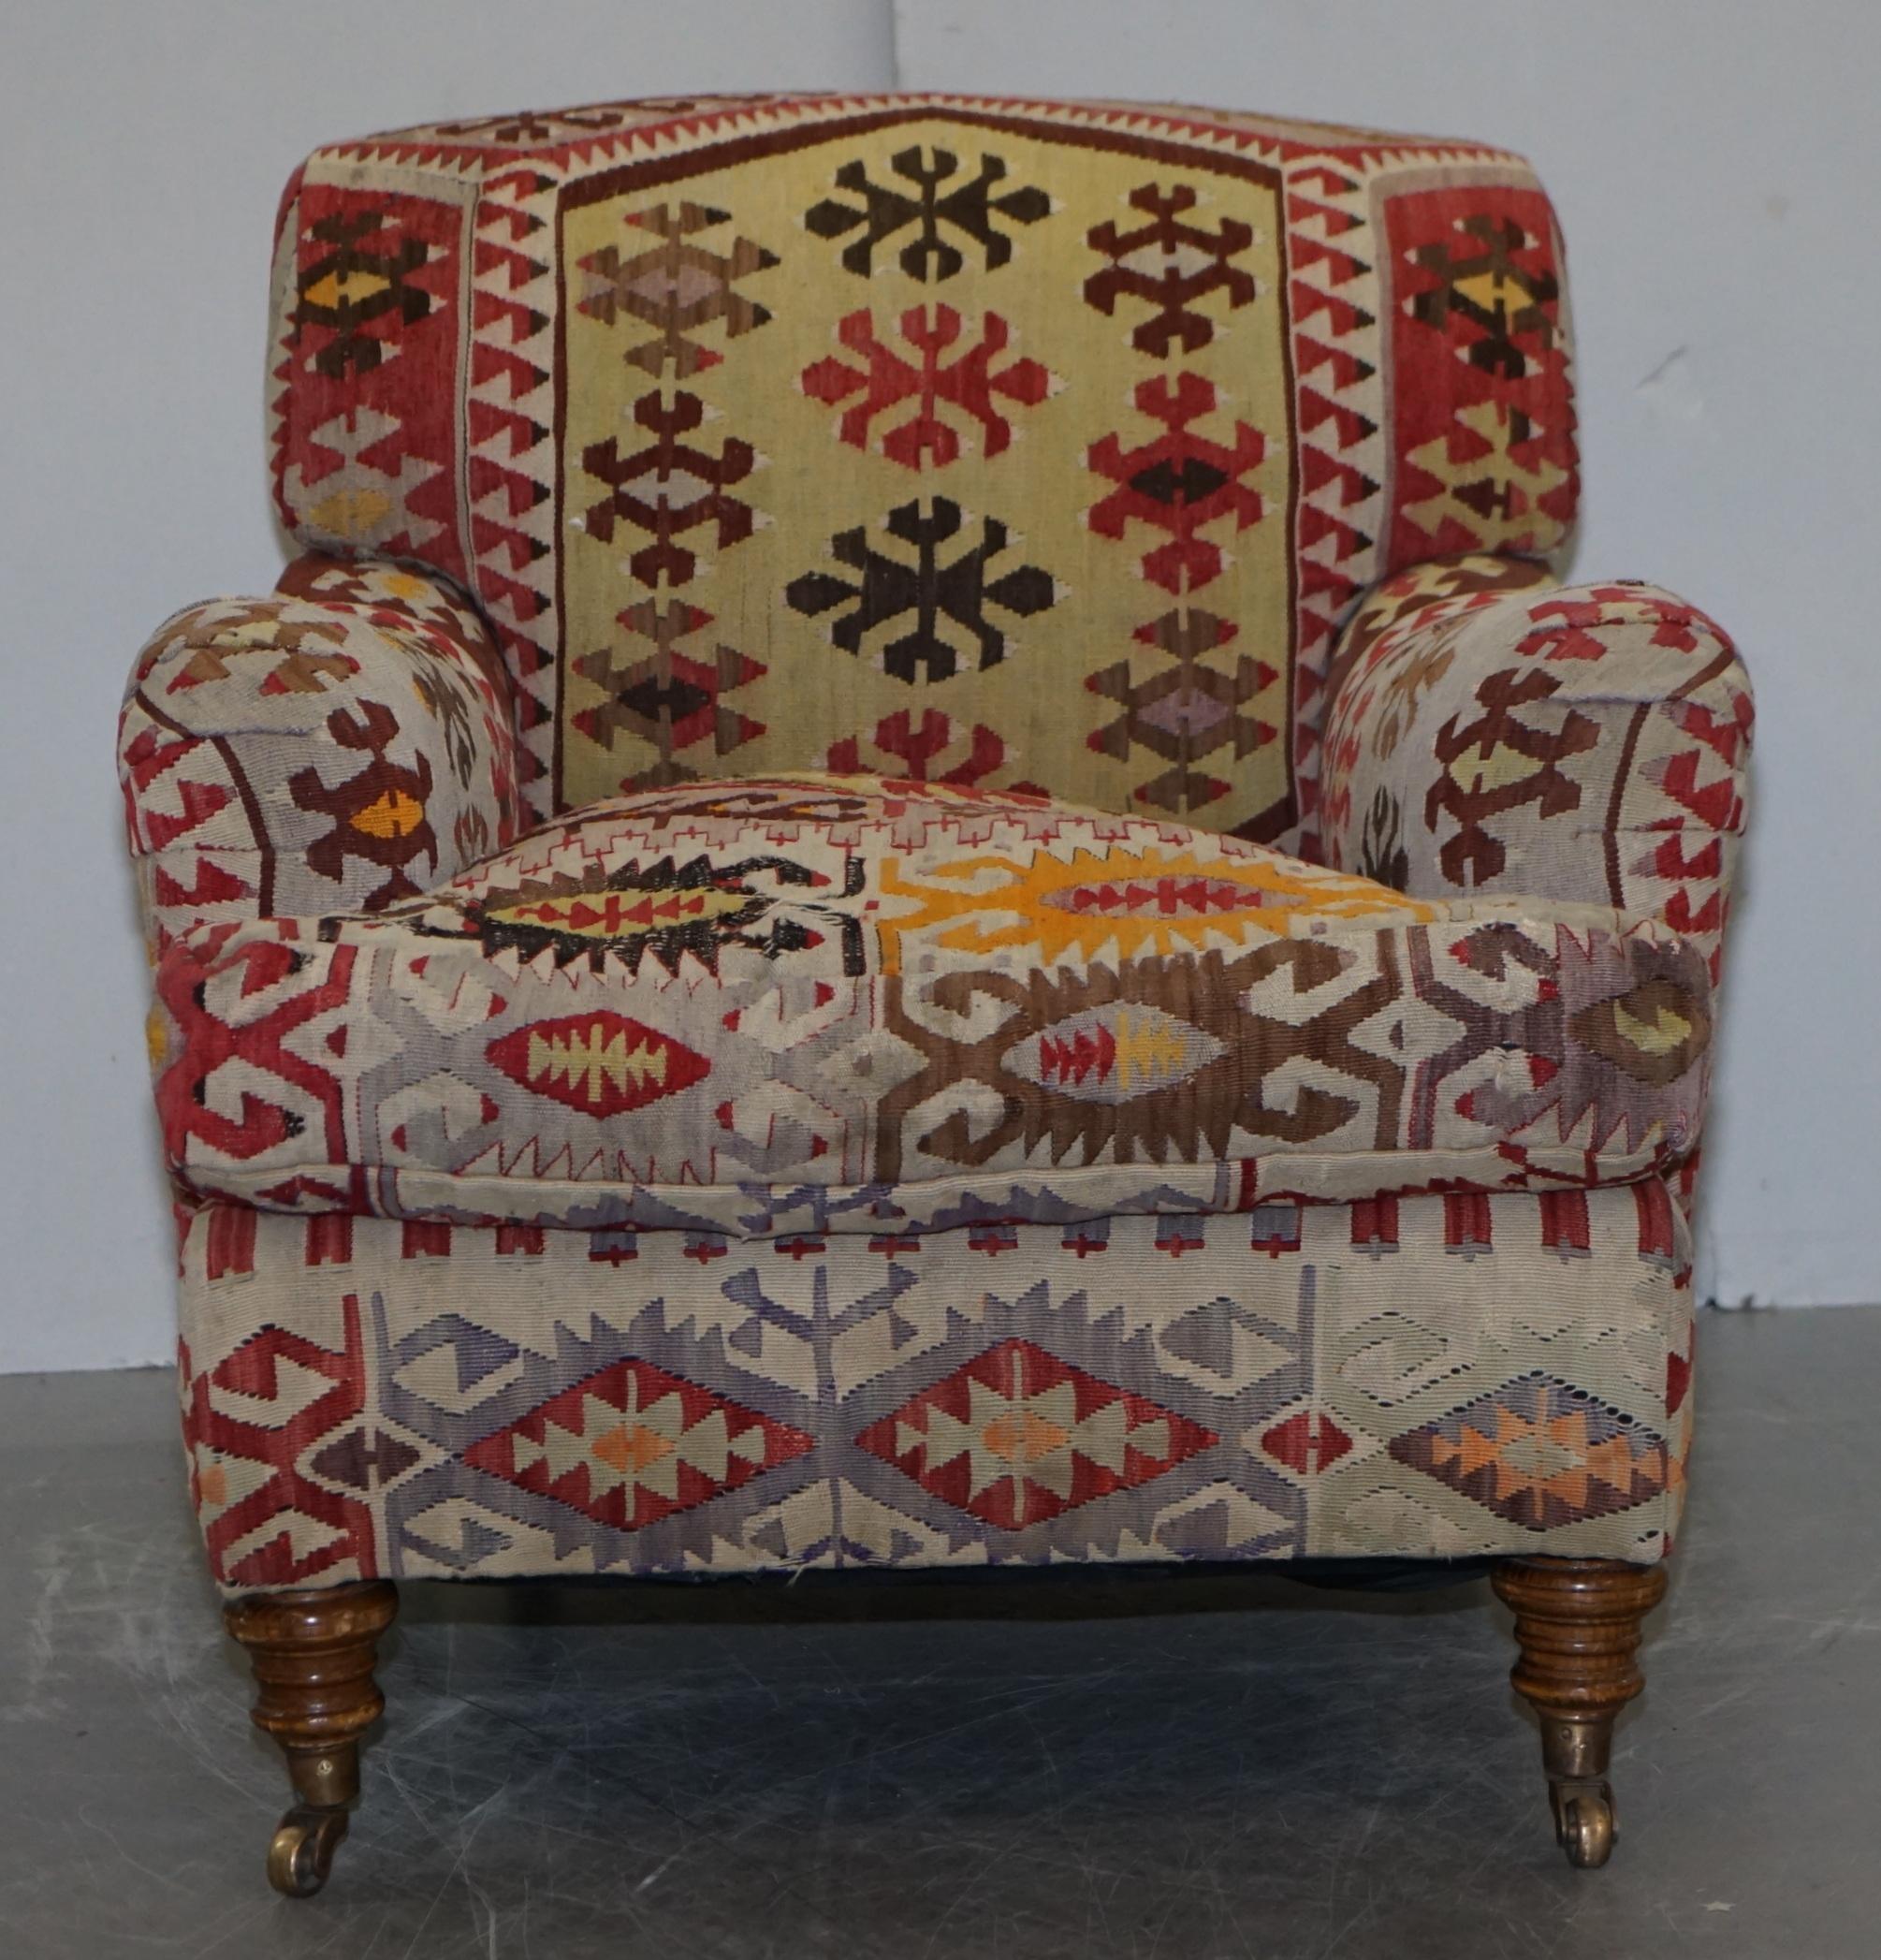 We are delighted to offer for sale this sublime and highly collectable George Smith Signature Scroll Arm Aztec Kilim Armchair with oversized feather filled cushion 

This is just about the finest armchair available to buy today upholstered with